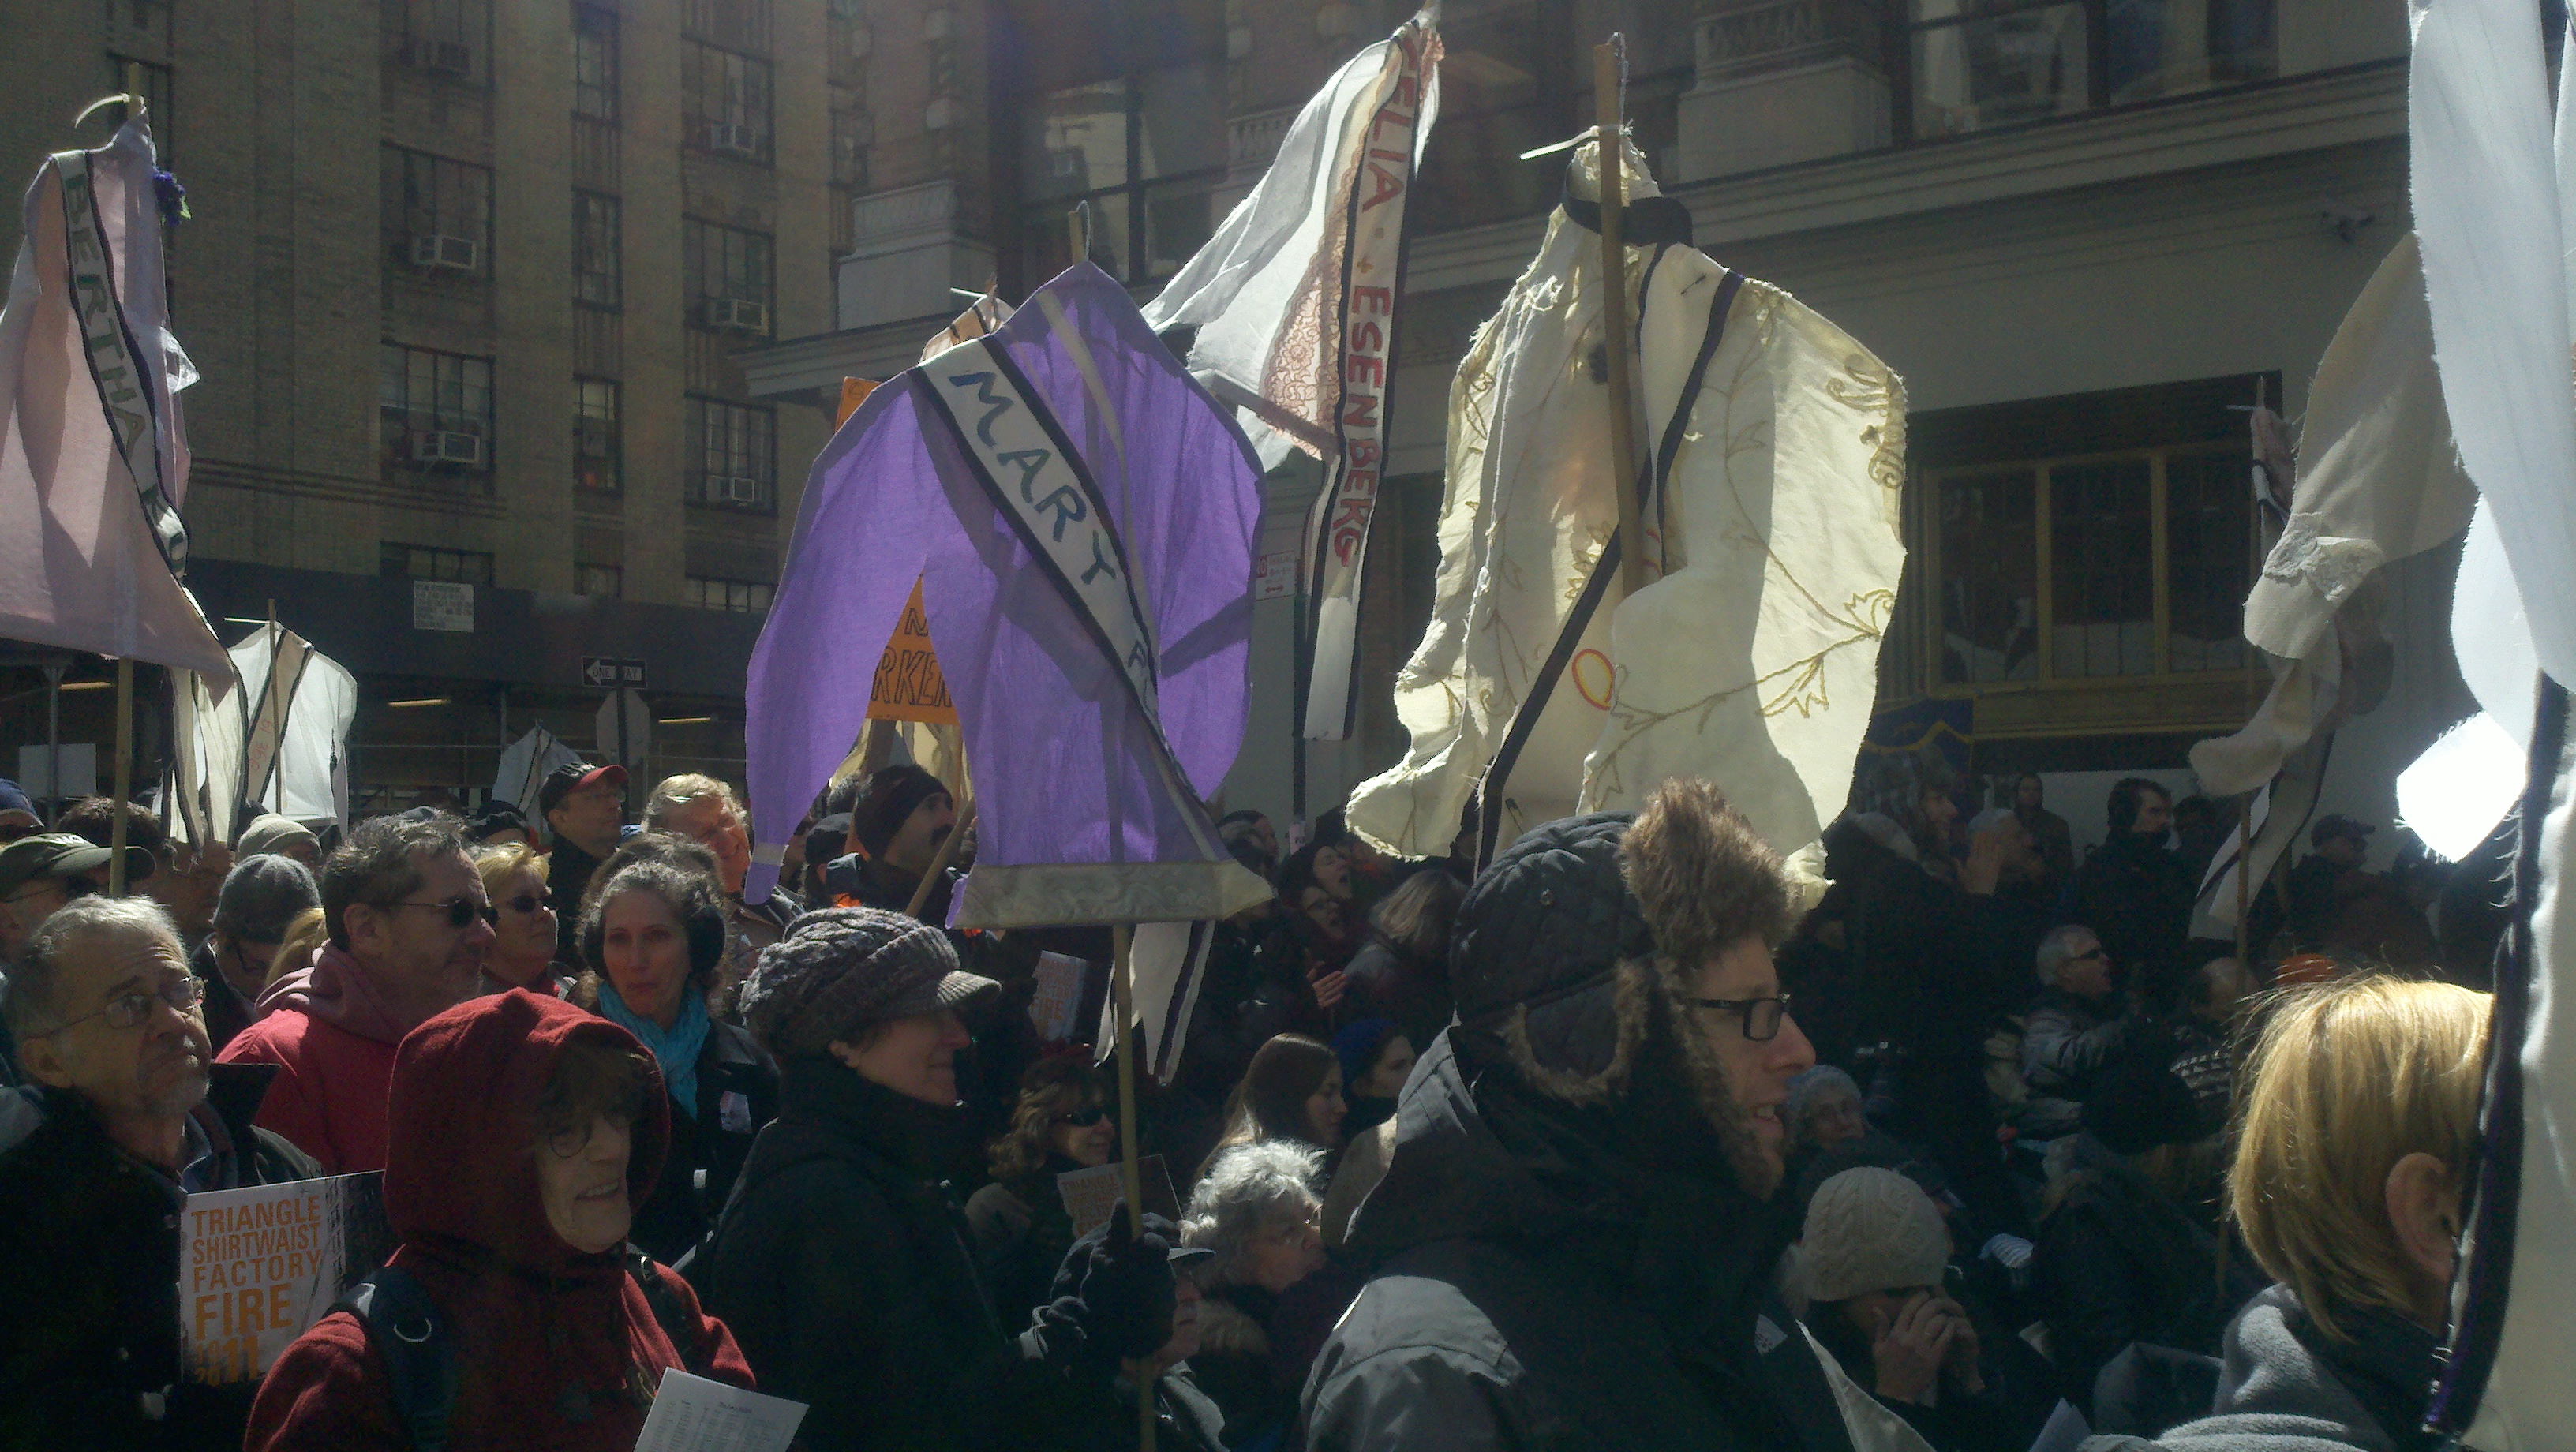 Marchers commemorated the 100th anniversary of the Triangle Shirtwaist Factory Fire 